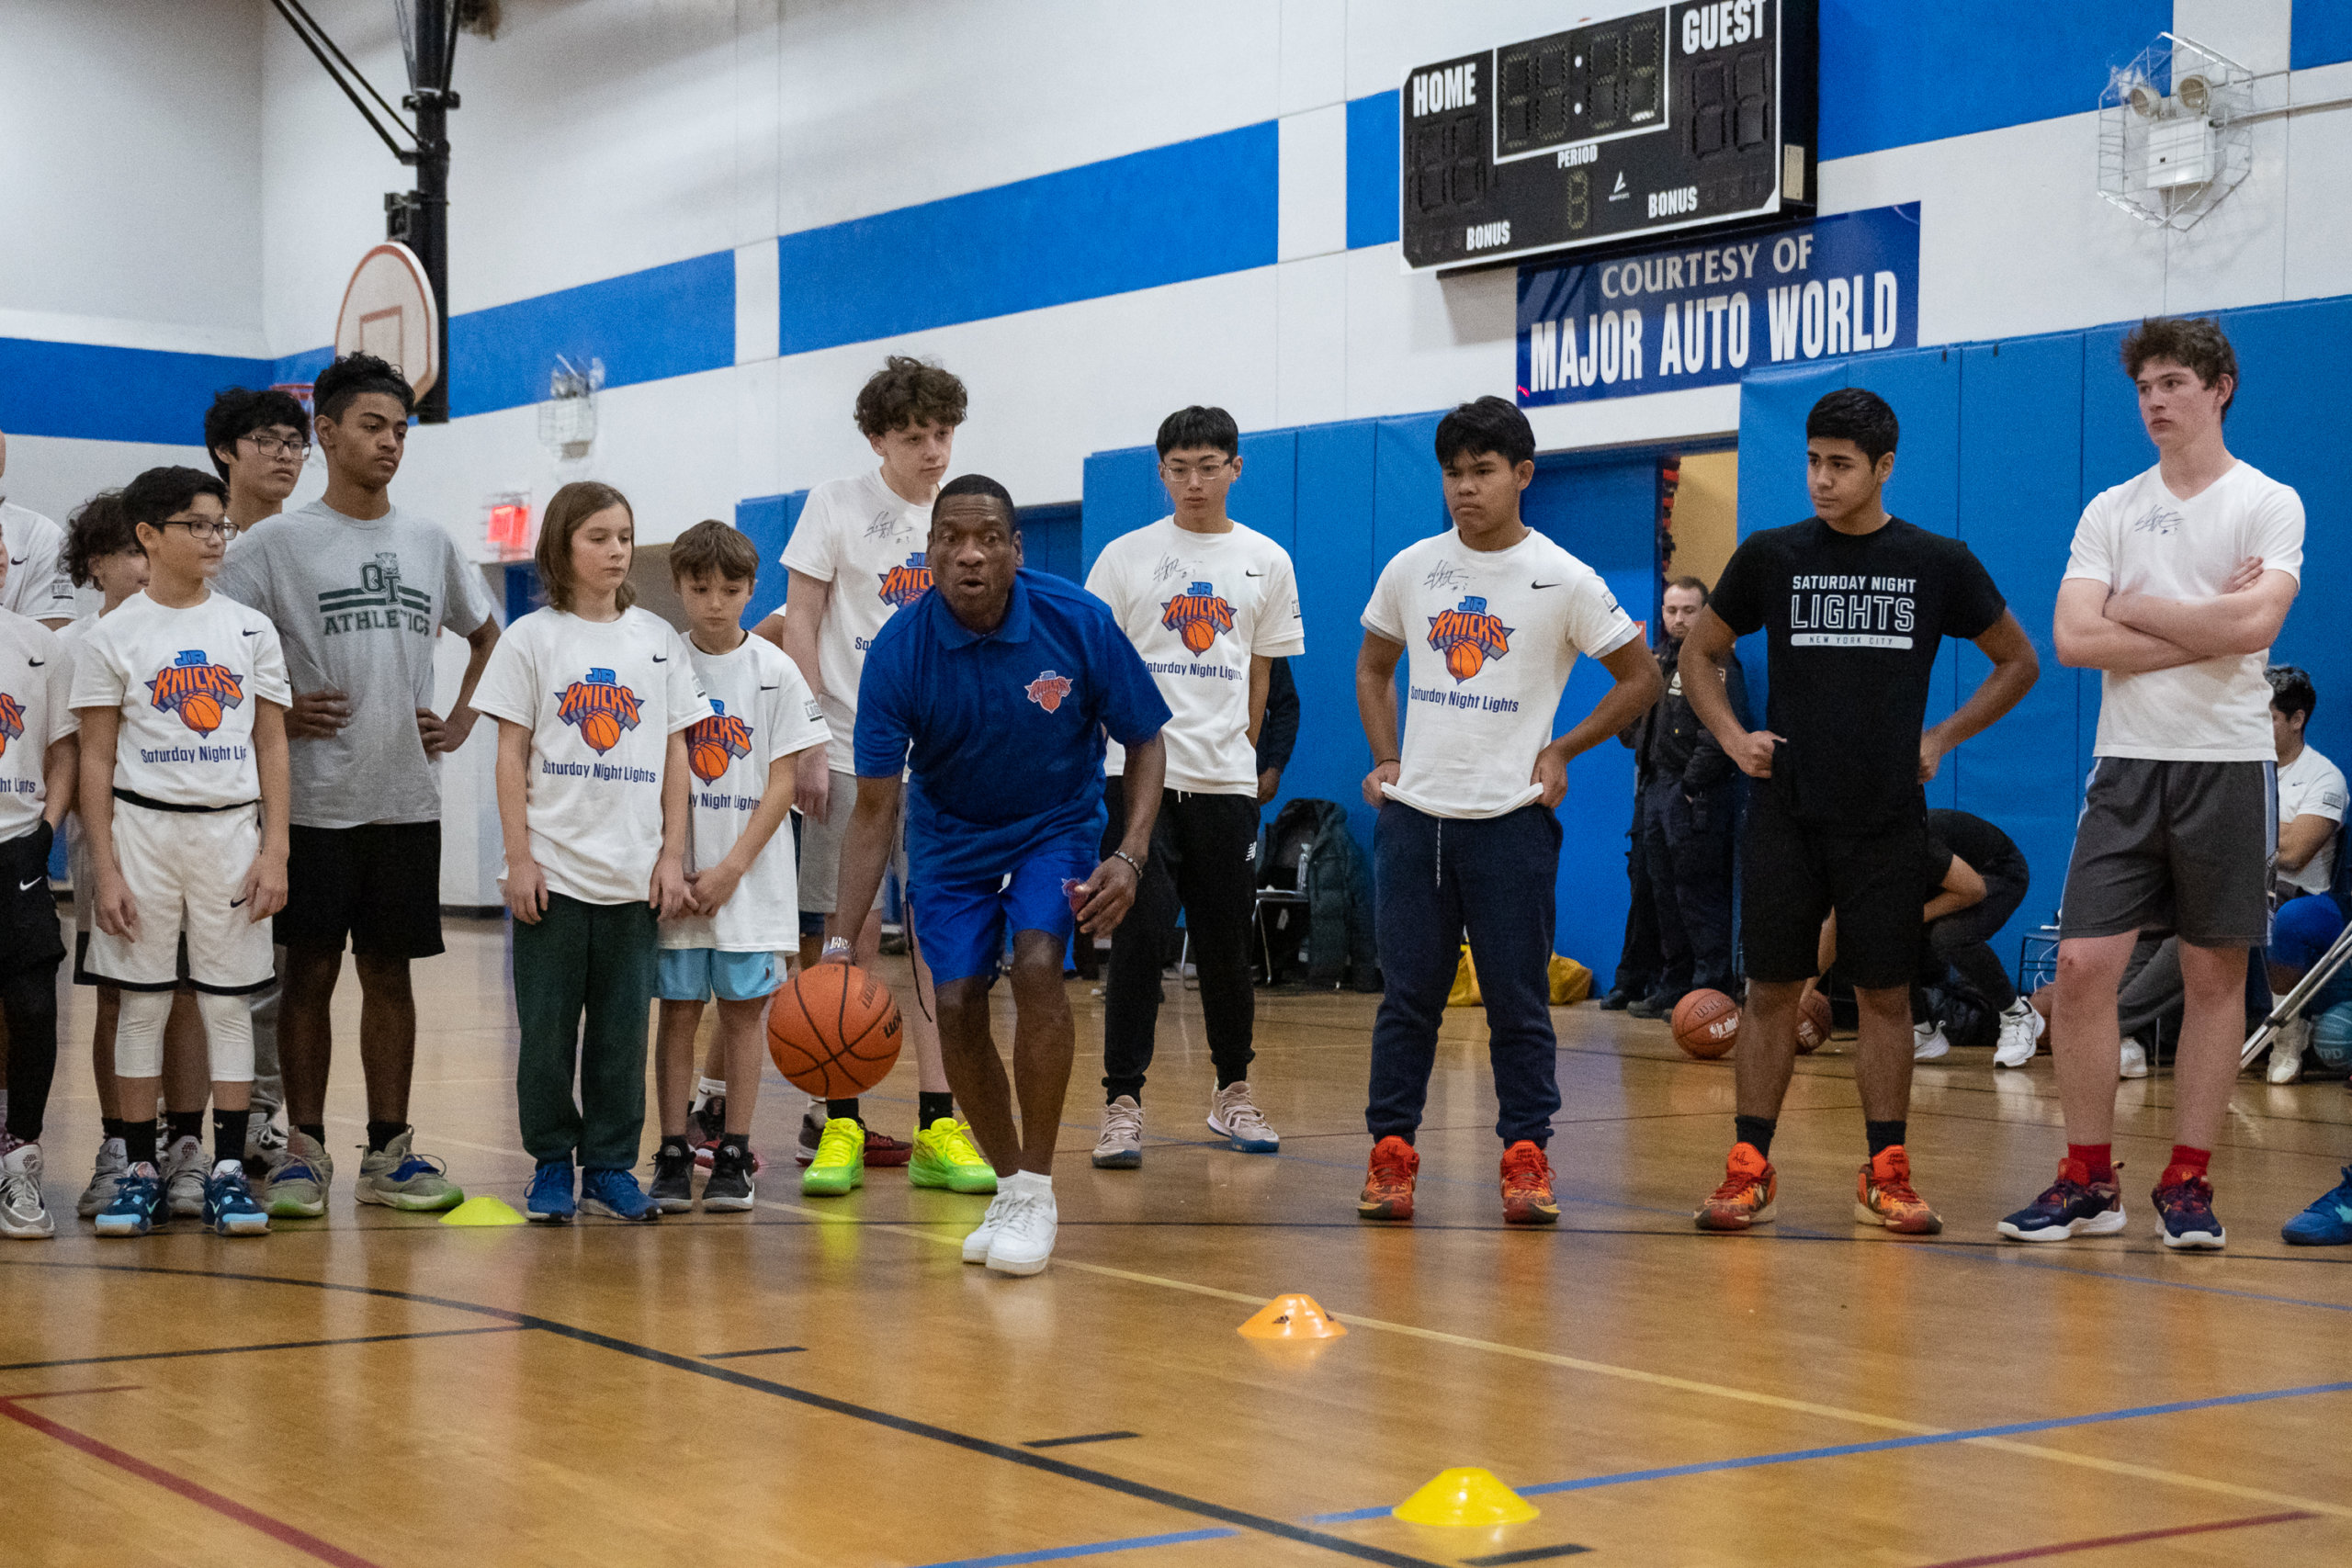 New York Knicks, YMCA of Greater New York, DYCD Expand Partnership,  Announce Five More Free Basketball Clinics for Local Teens